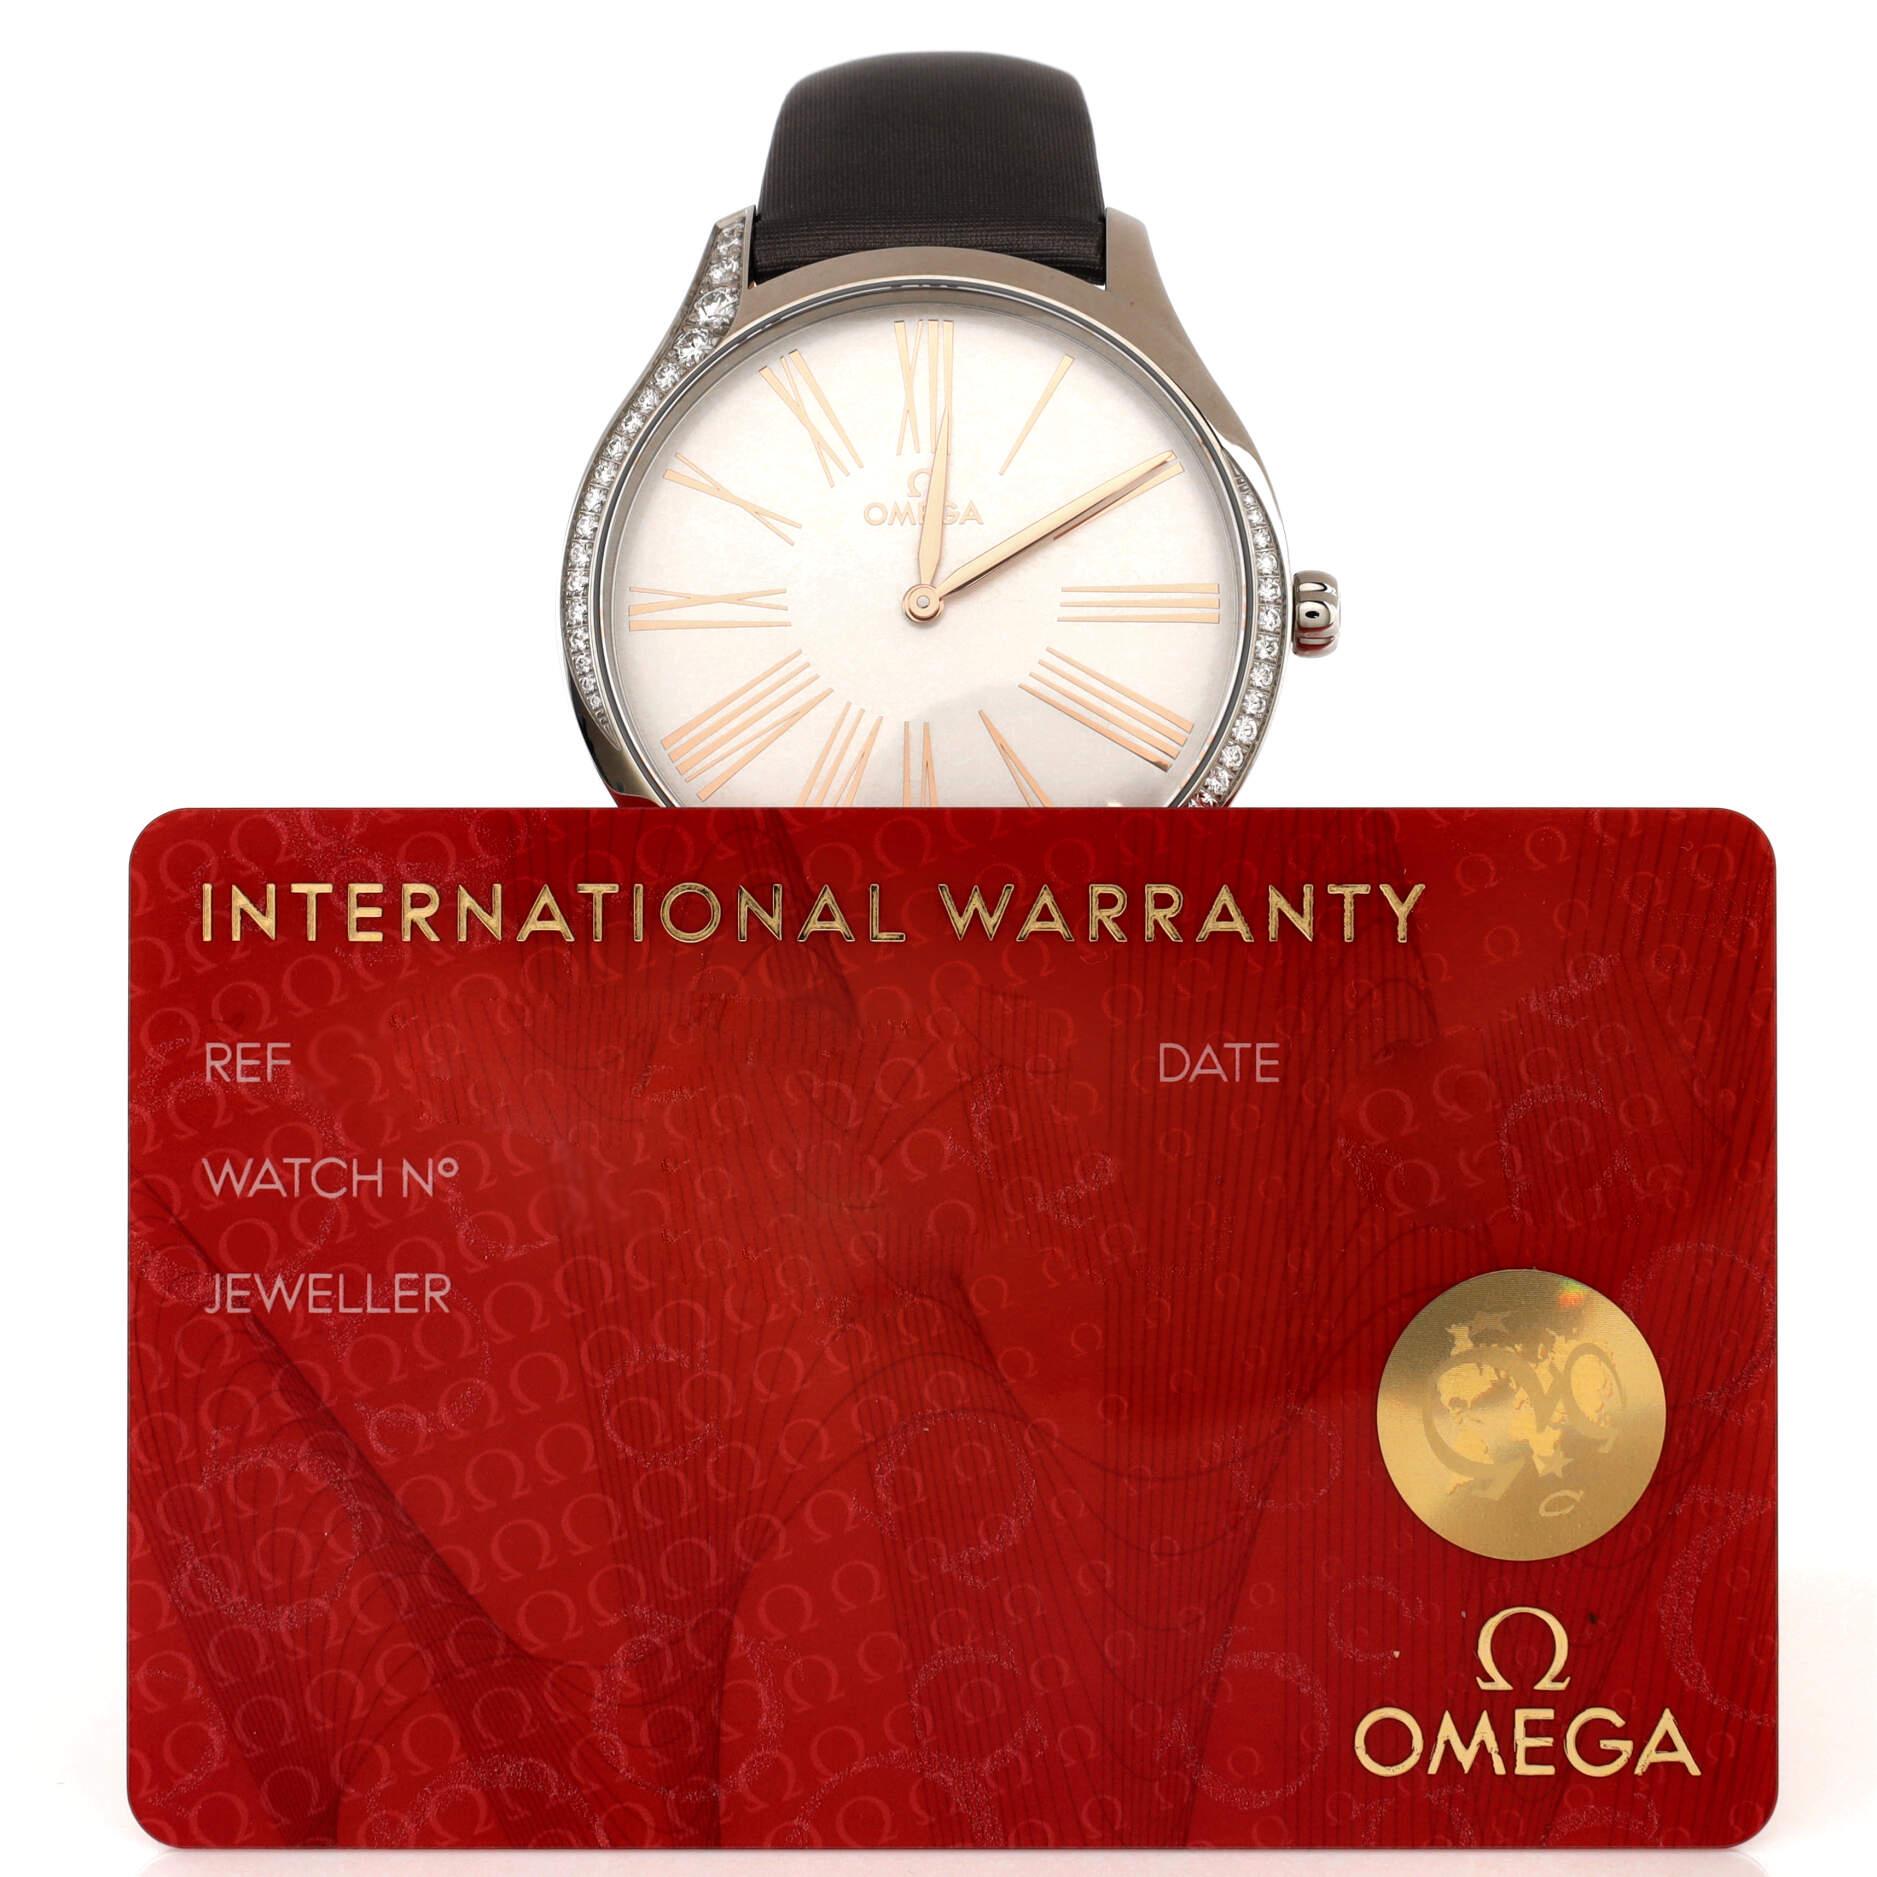 Condition: Excellent. Minimal wear throughout case and strap.
Accessories: Warranty Card - Undated
Measurements: Case Size/Width: 39mm, Watch Height: 10mm, Band Width: 19mm, Wrist circumference: 6.25